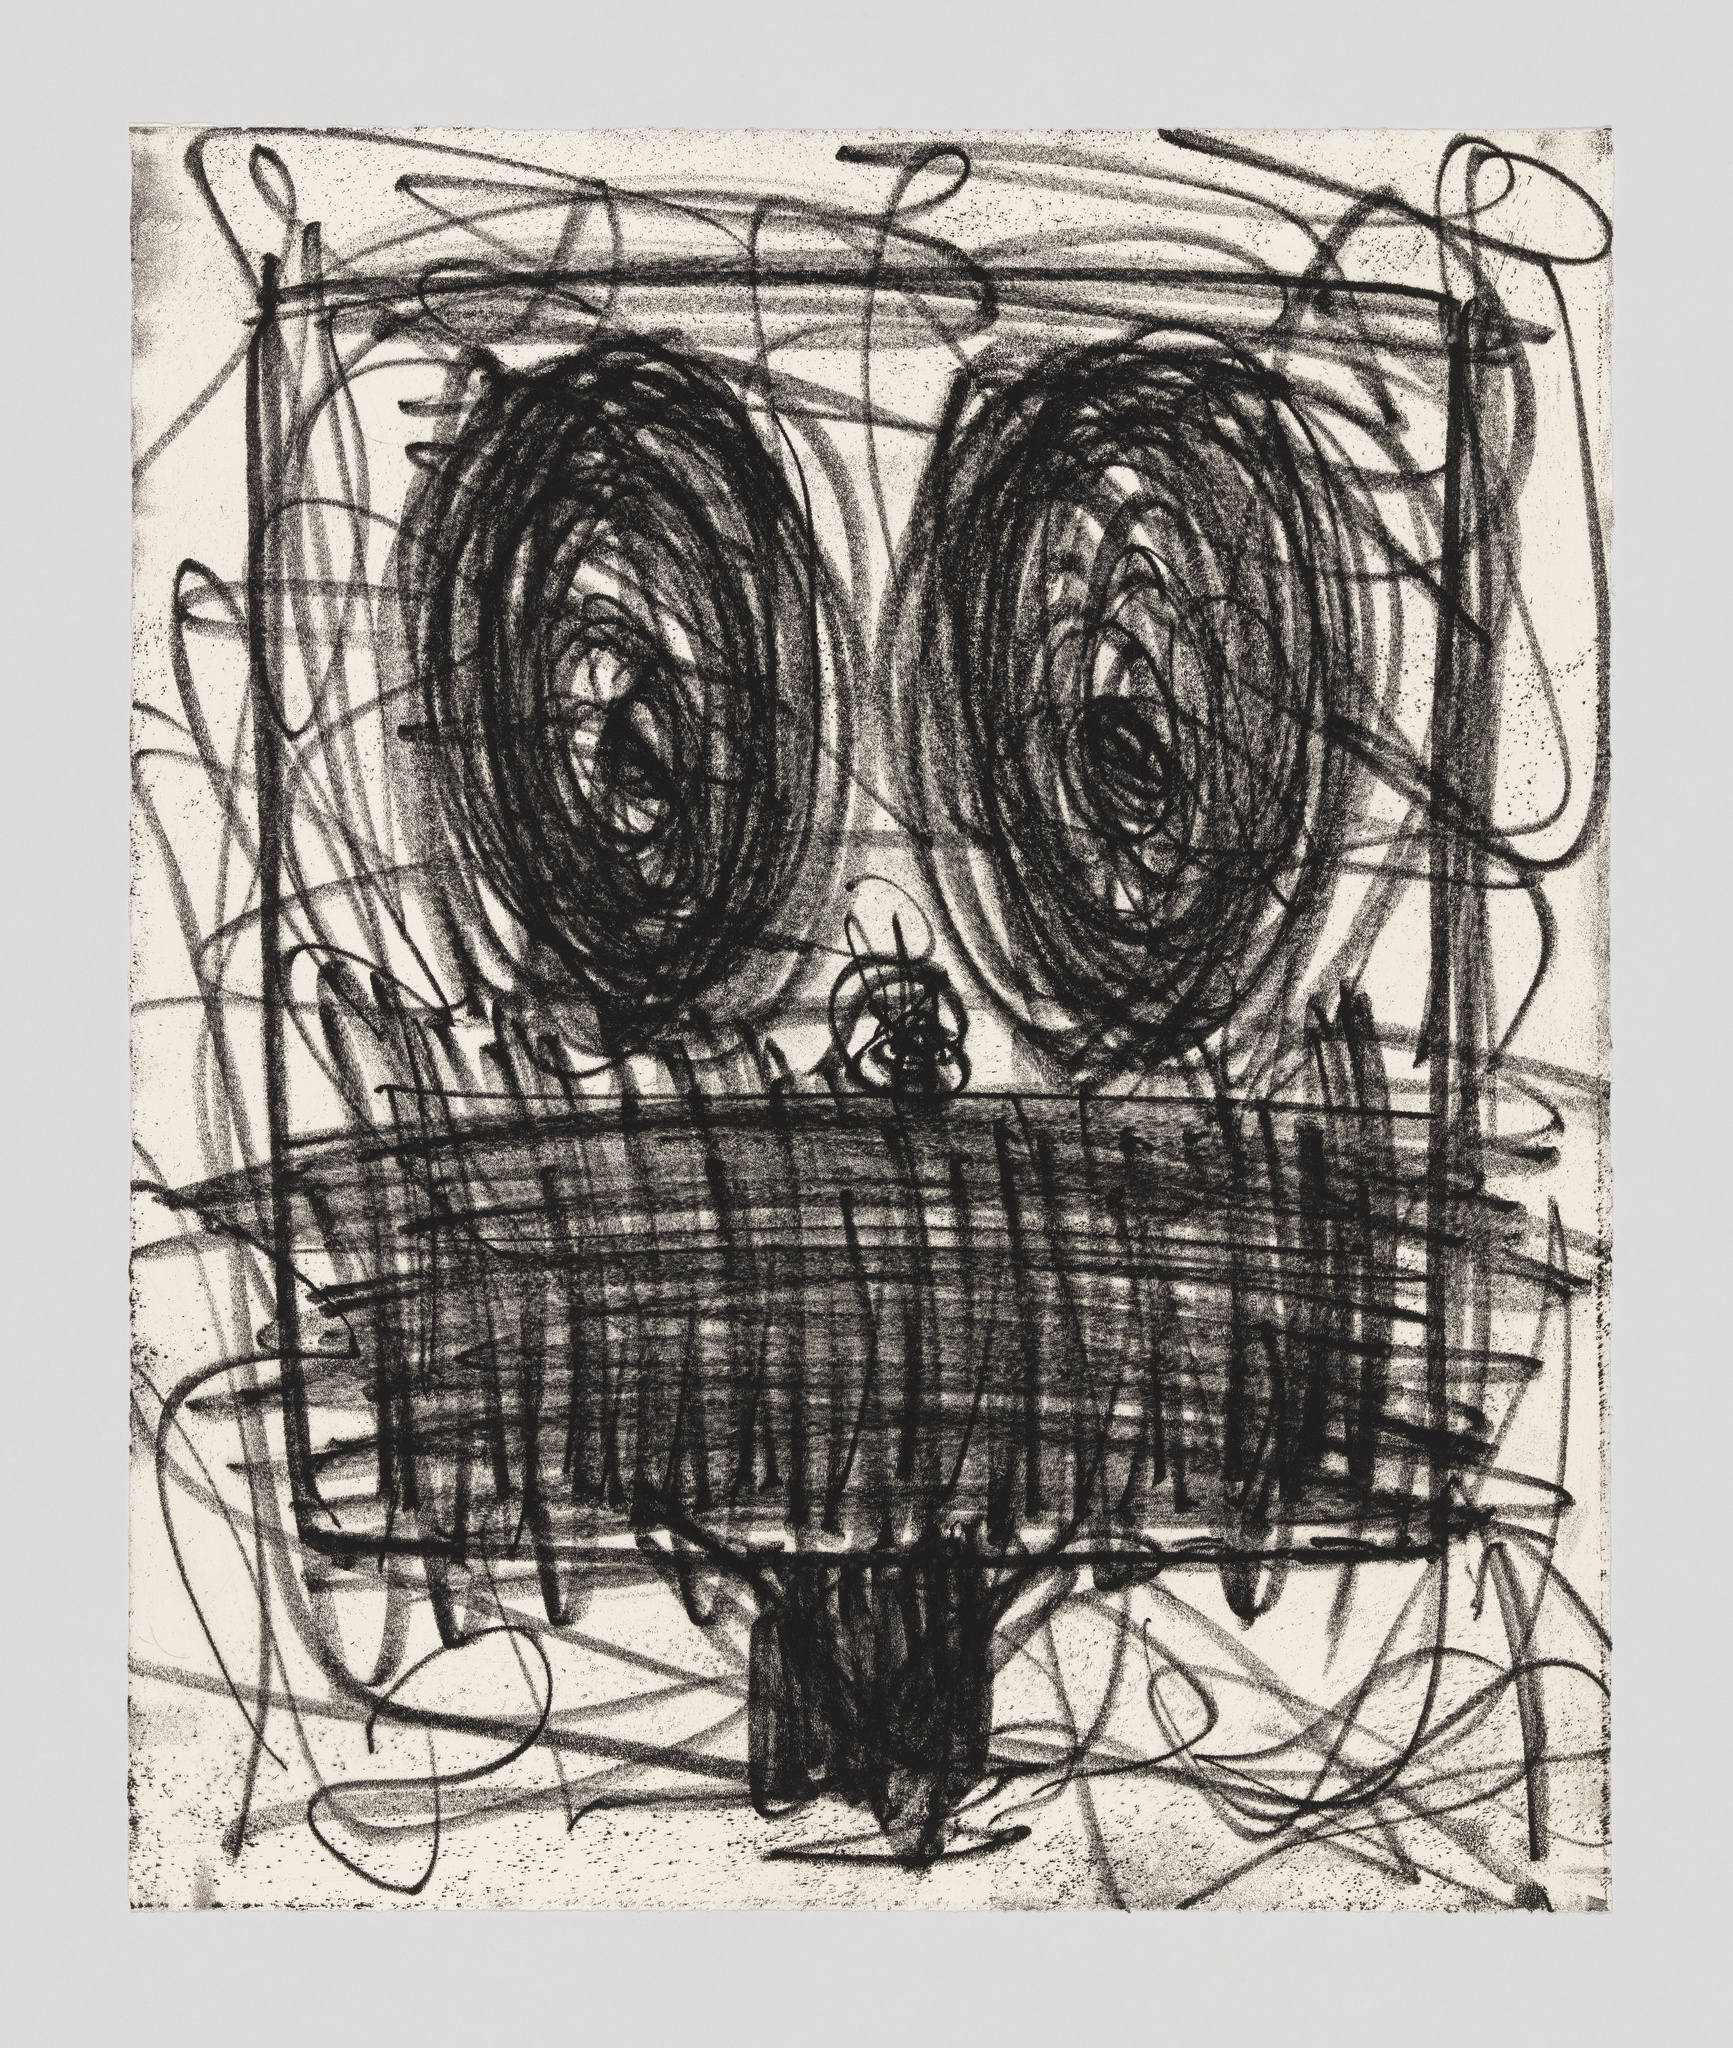 A face with big dark swirls for eyes, and chaotic, scribble-like patterns depicting the mouth.